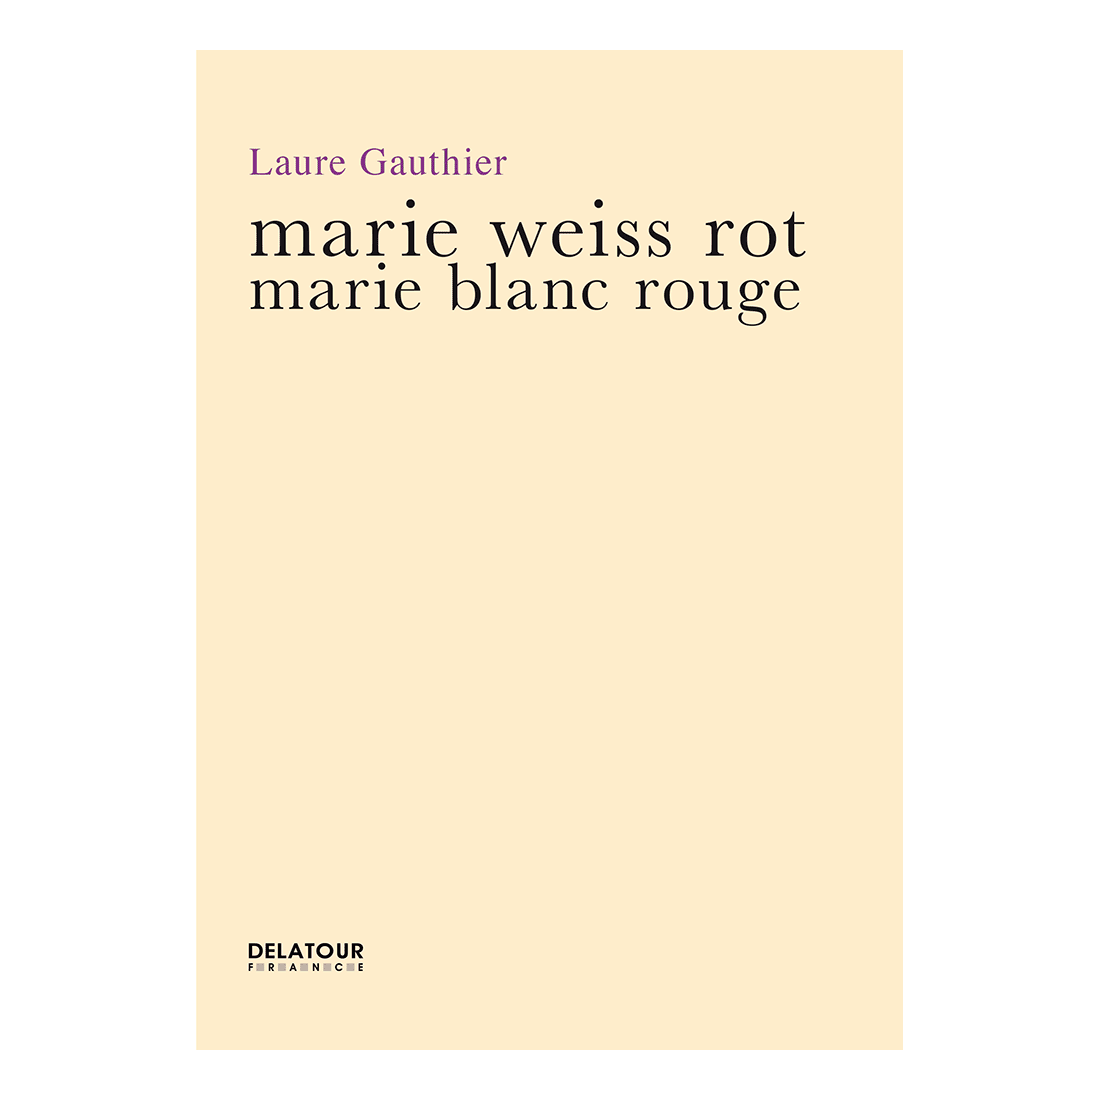 Marie blanc rouge - Marie weiss rot (Edition bilingue)